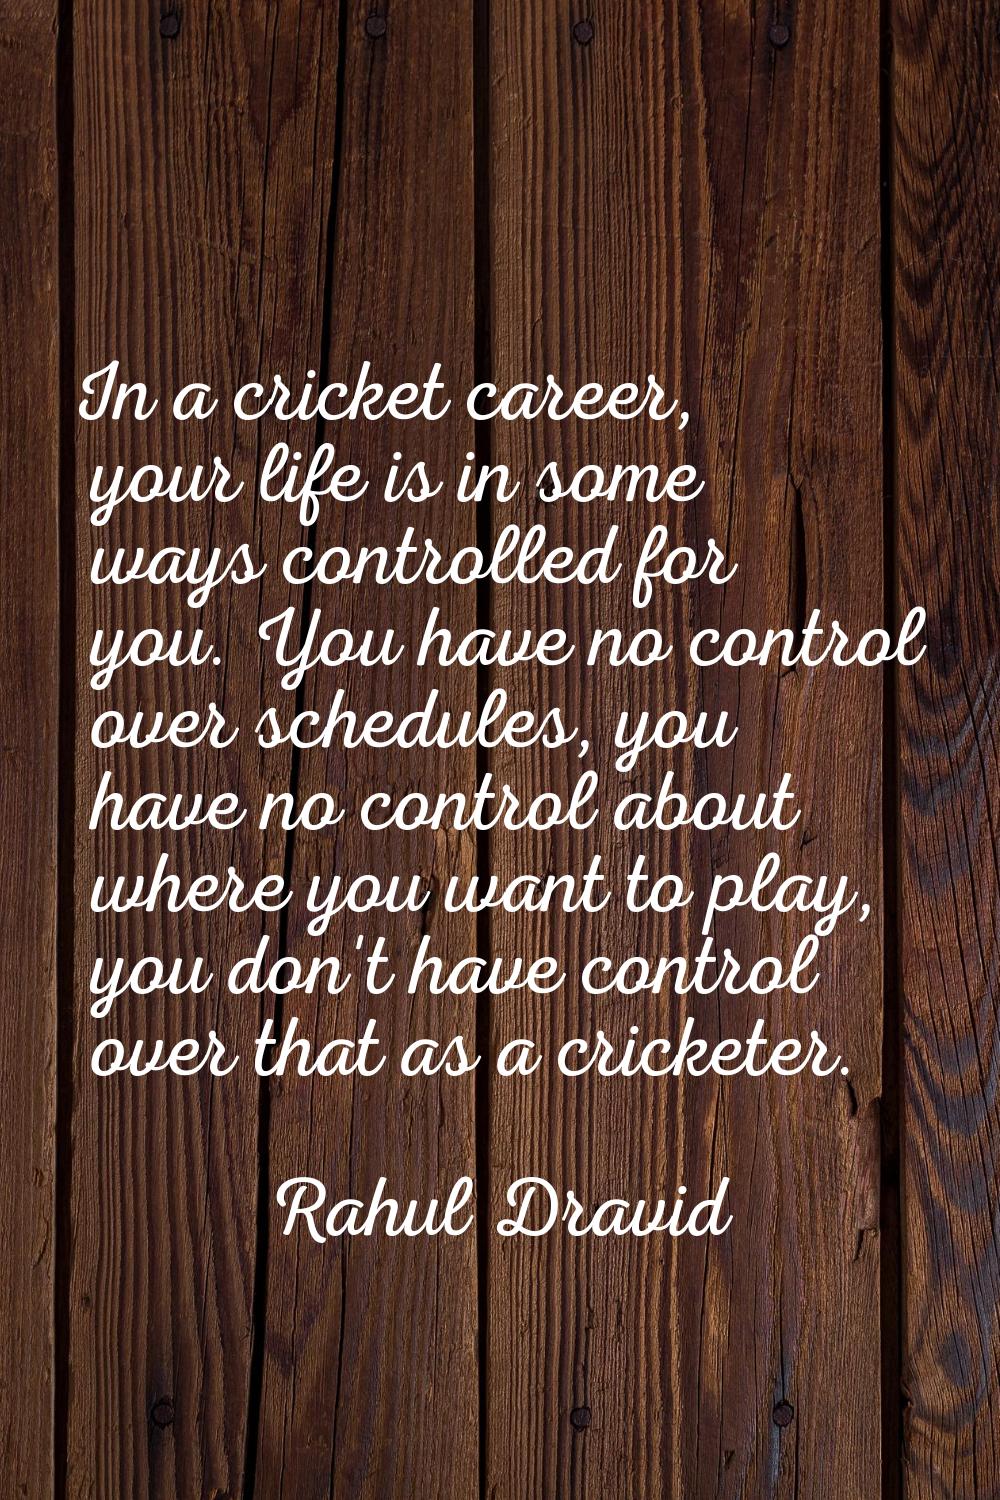 In a cricket career, your life is in some ways controlled for you. You have no control over schedul